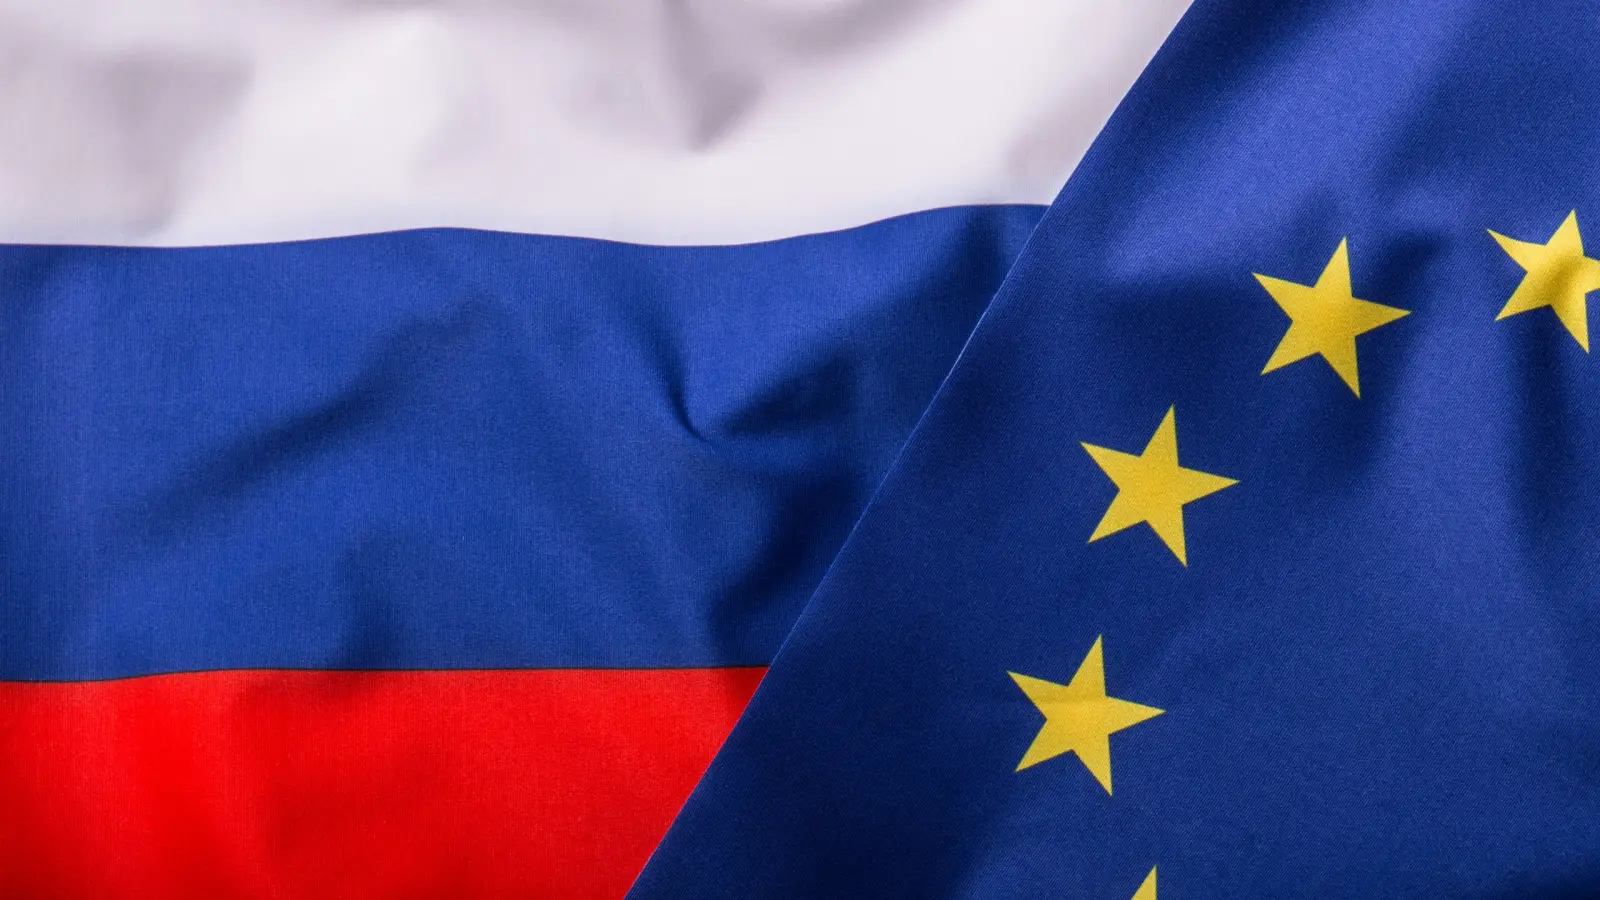 The European Union will impose new sanctions on Russia